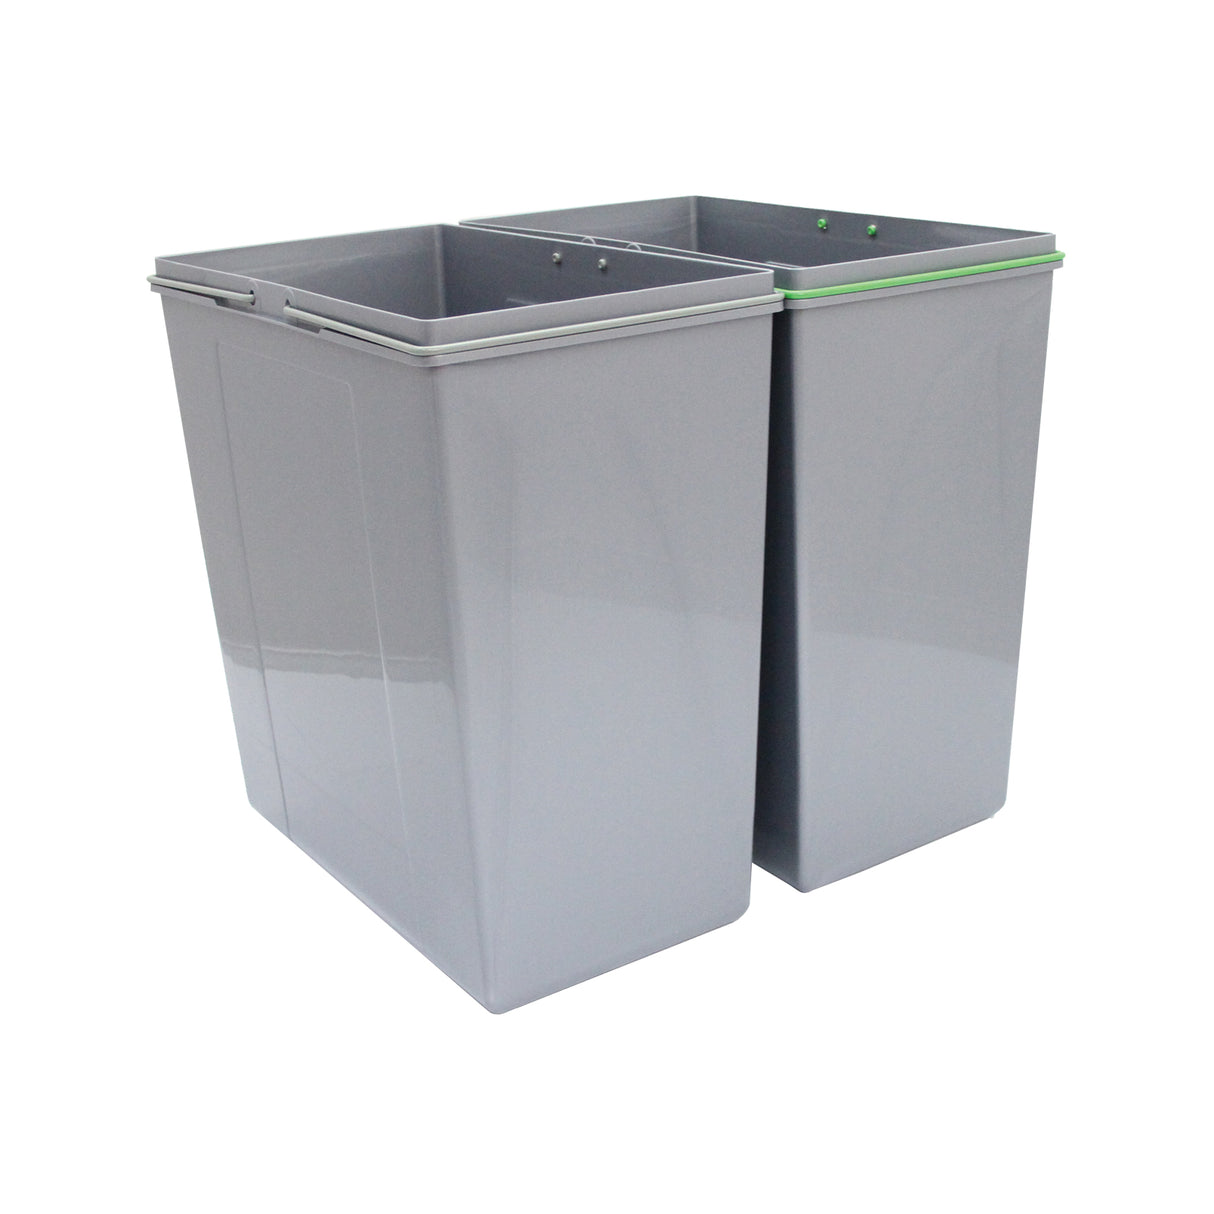 KuKoo 90L Pull Out Recycle Waste Bin